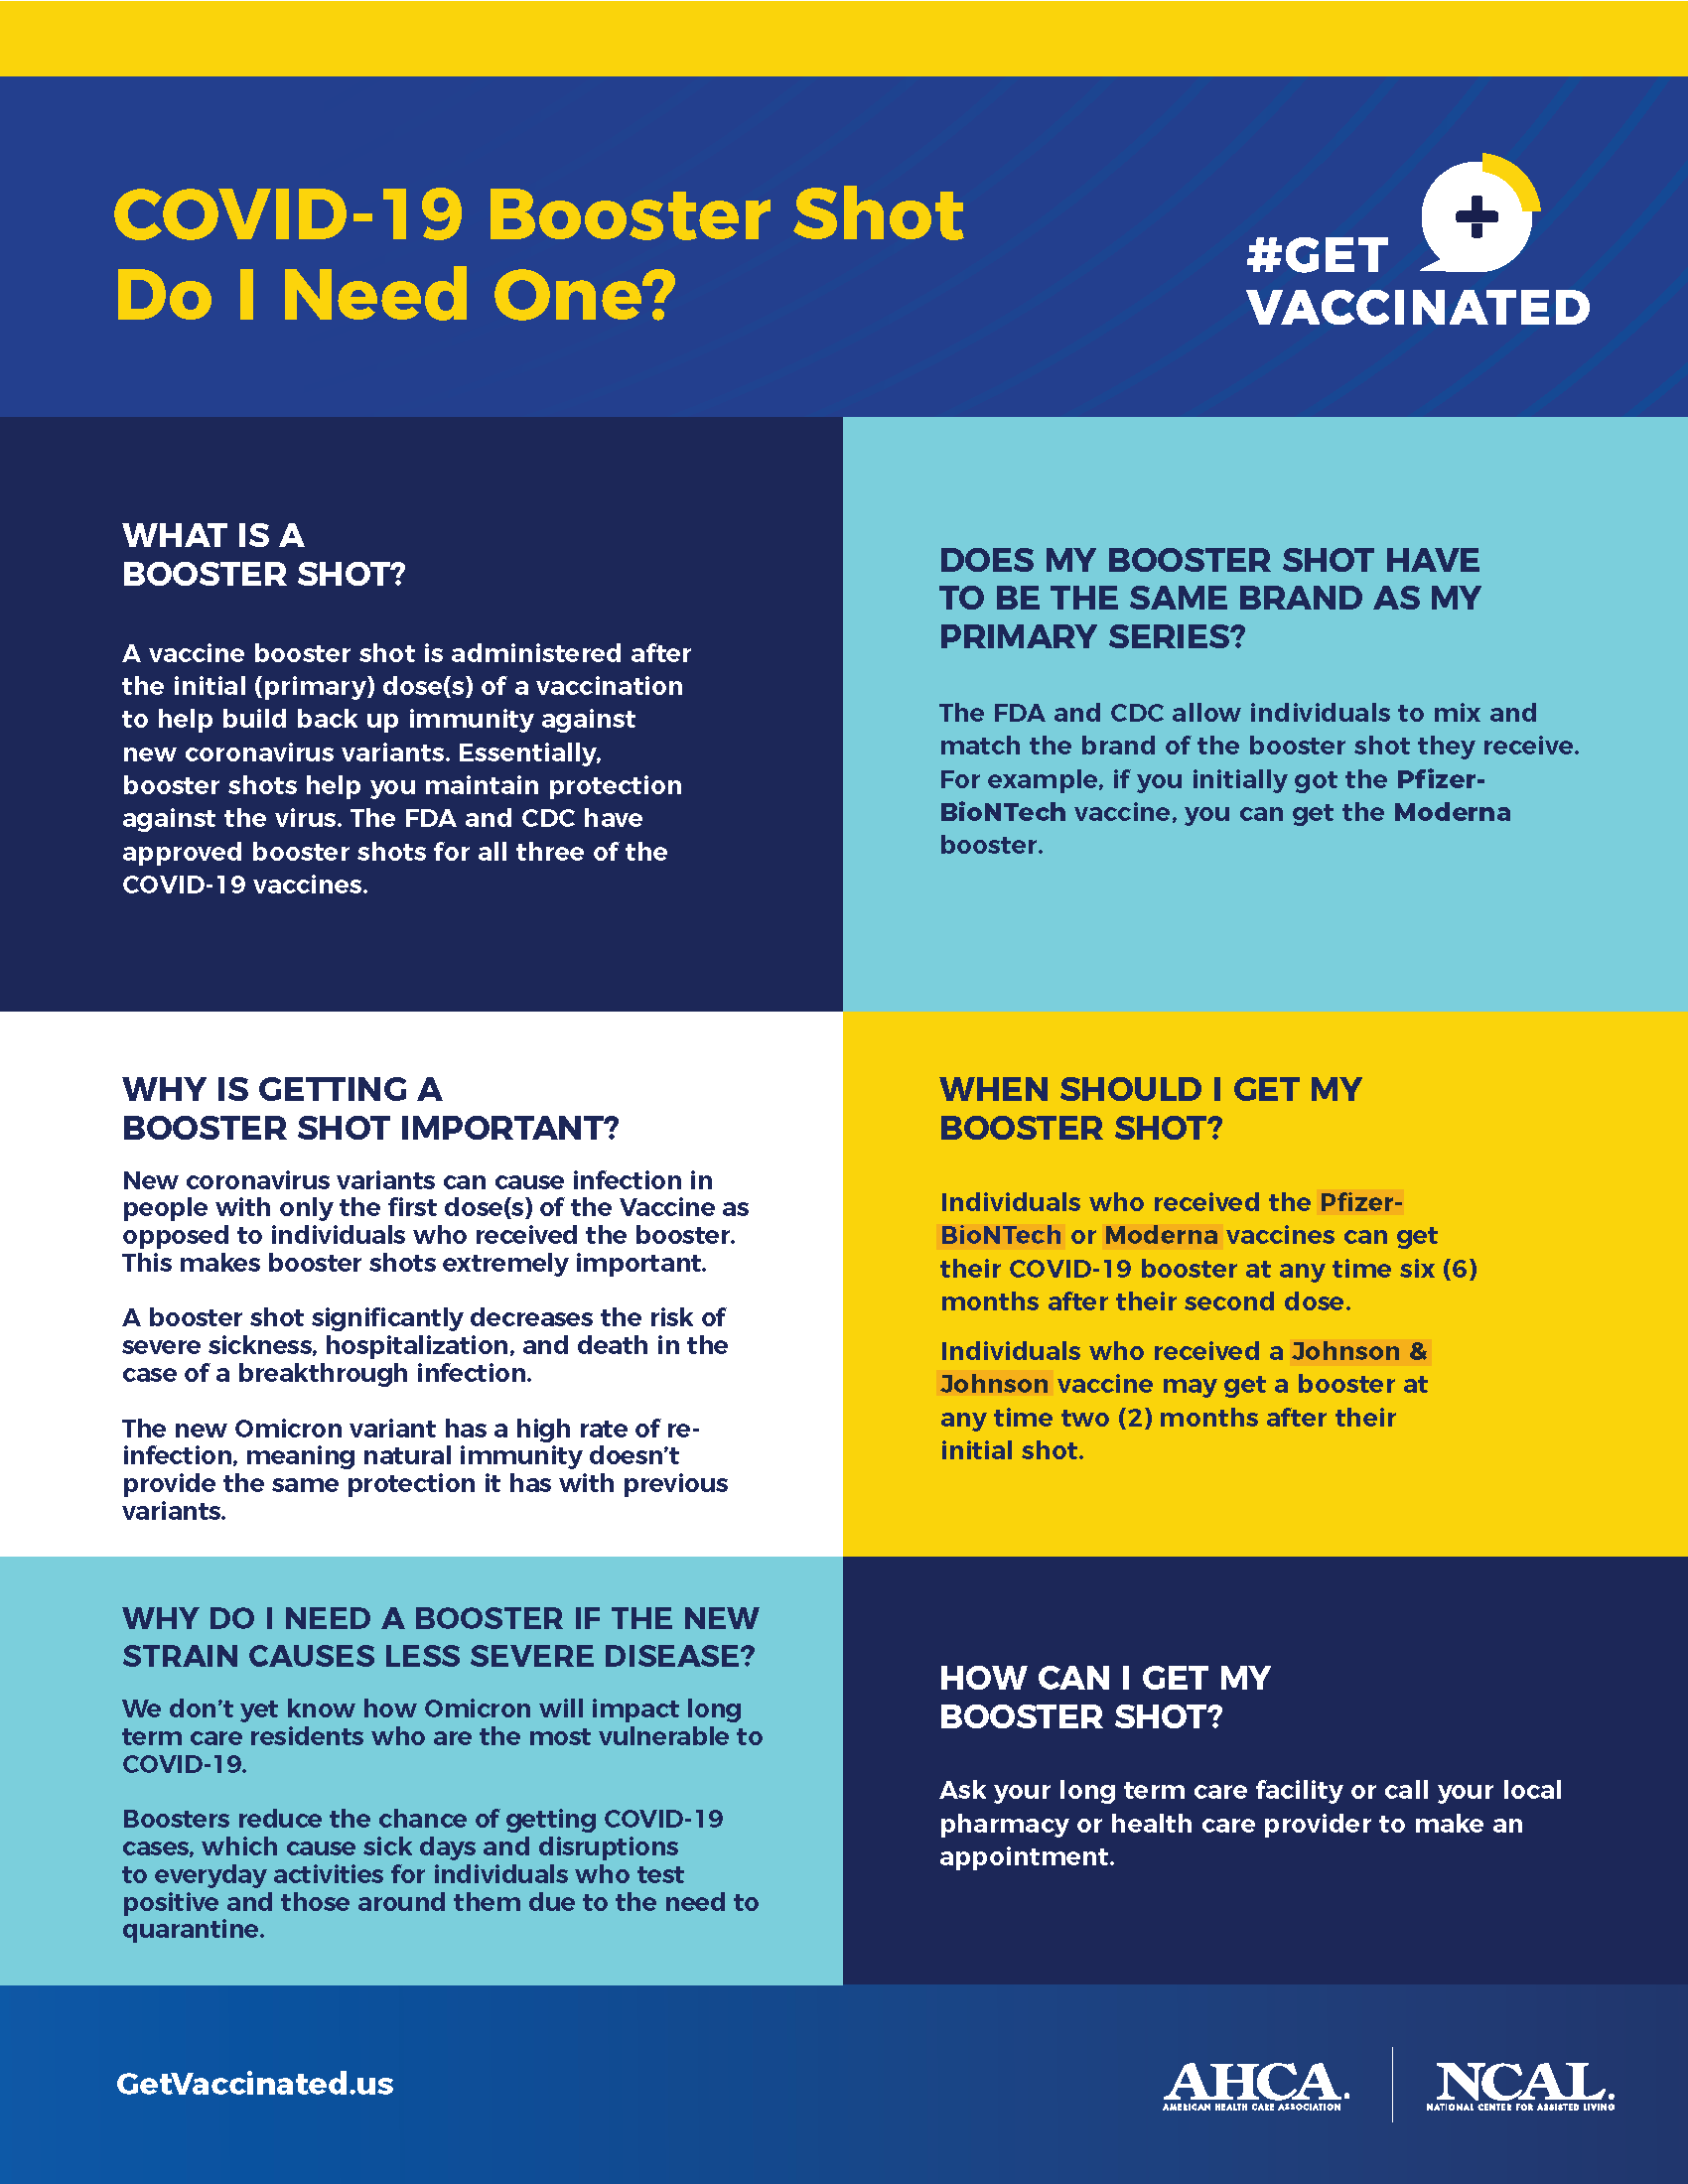 Get Vaccinated Flyer Image 